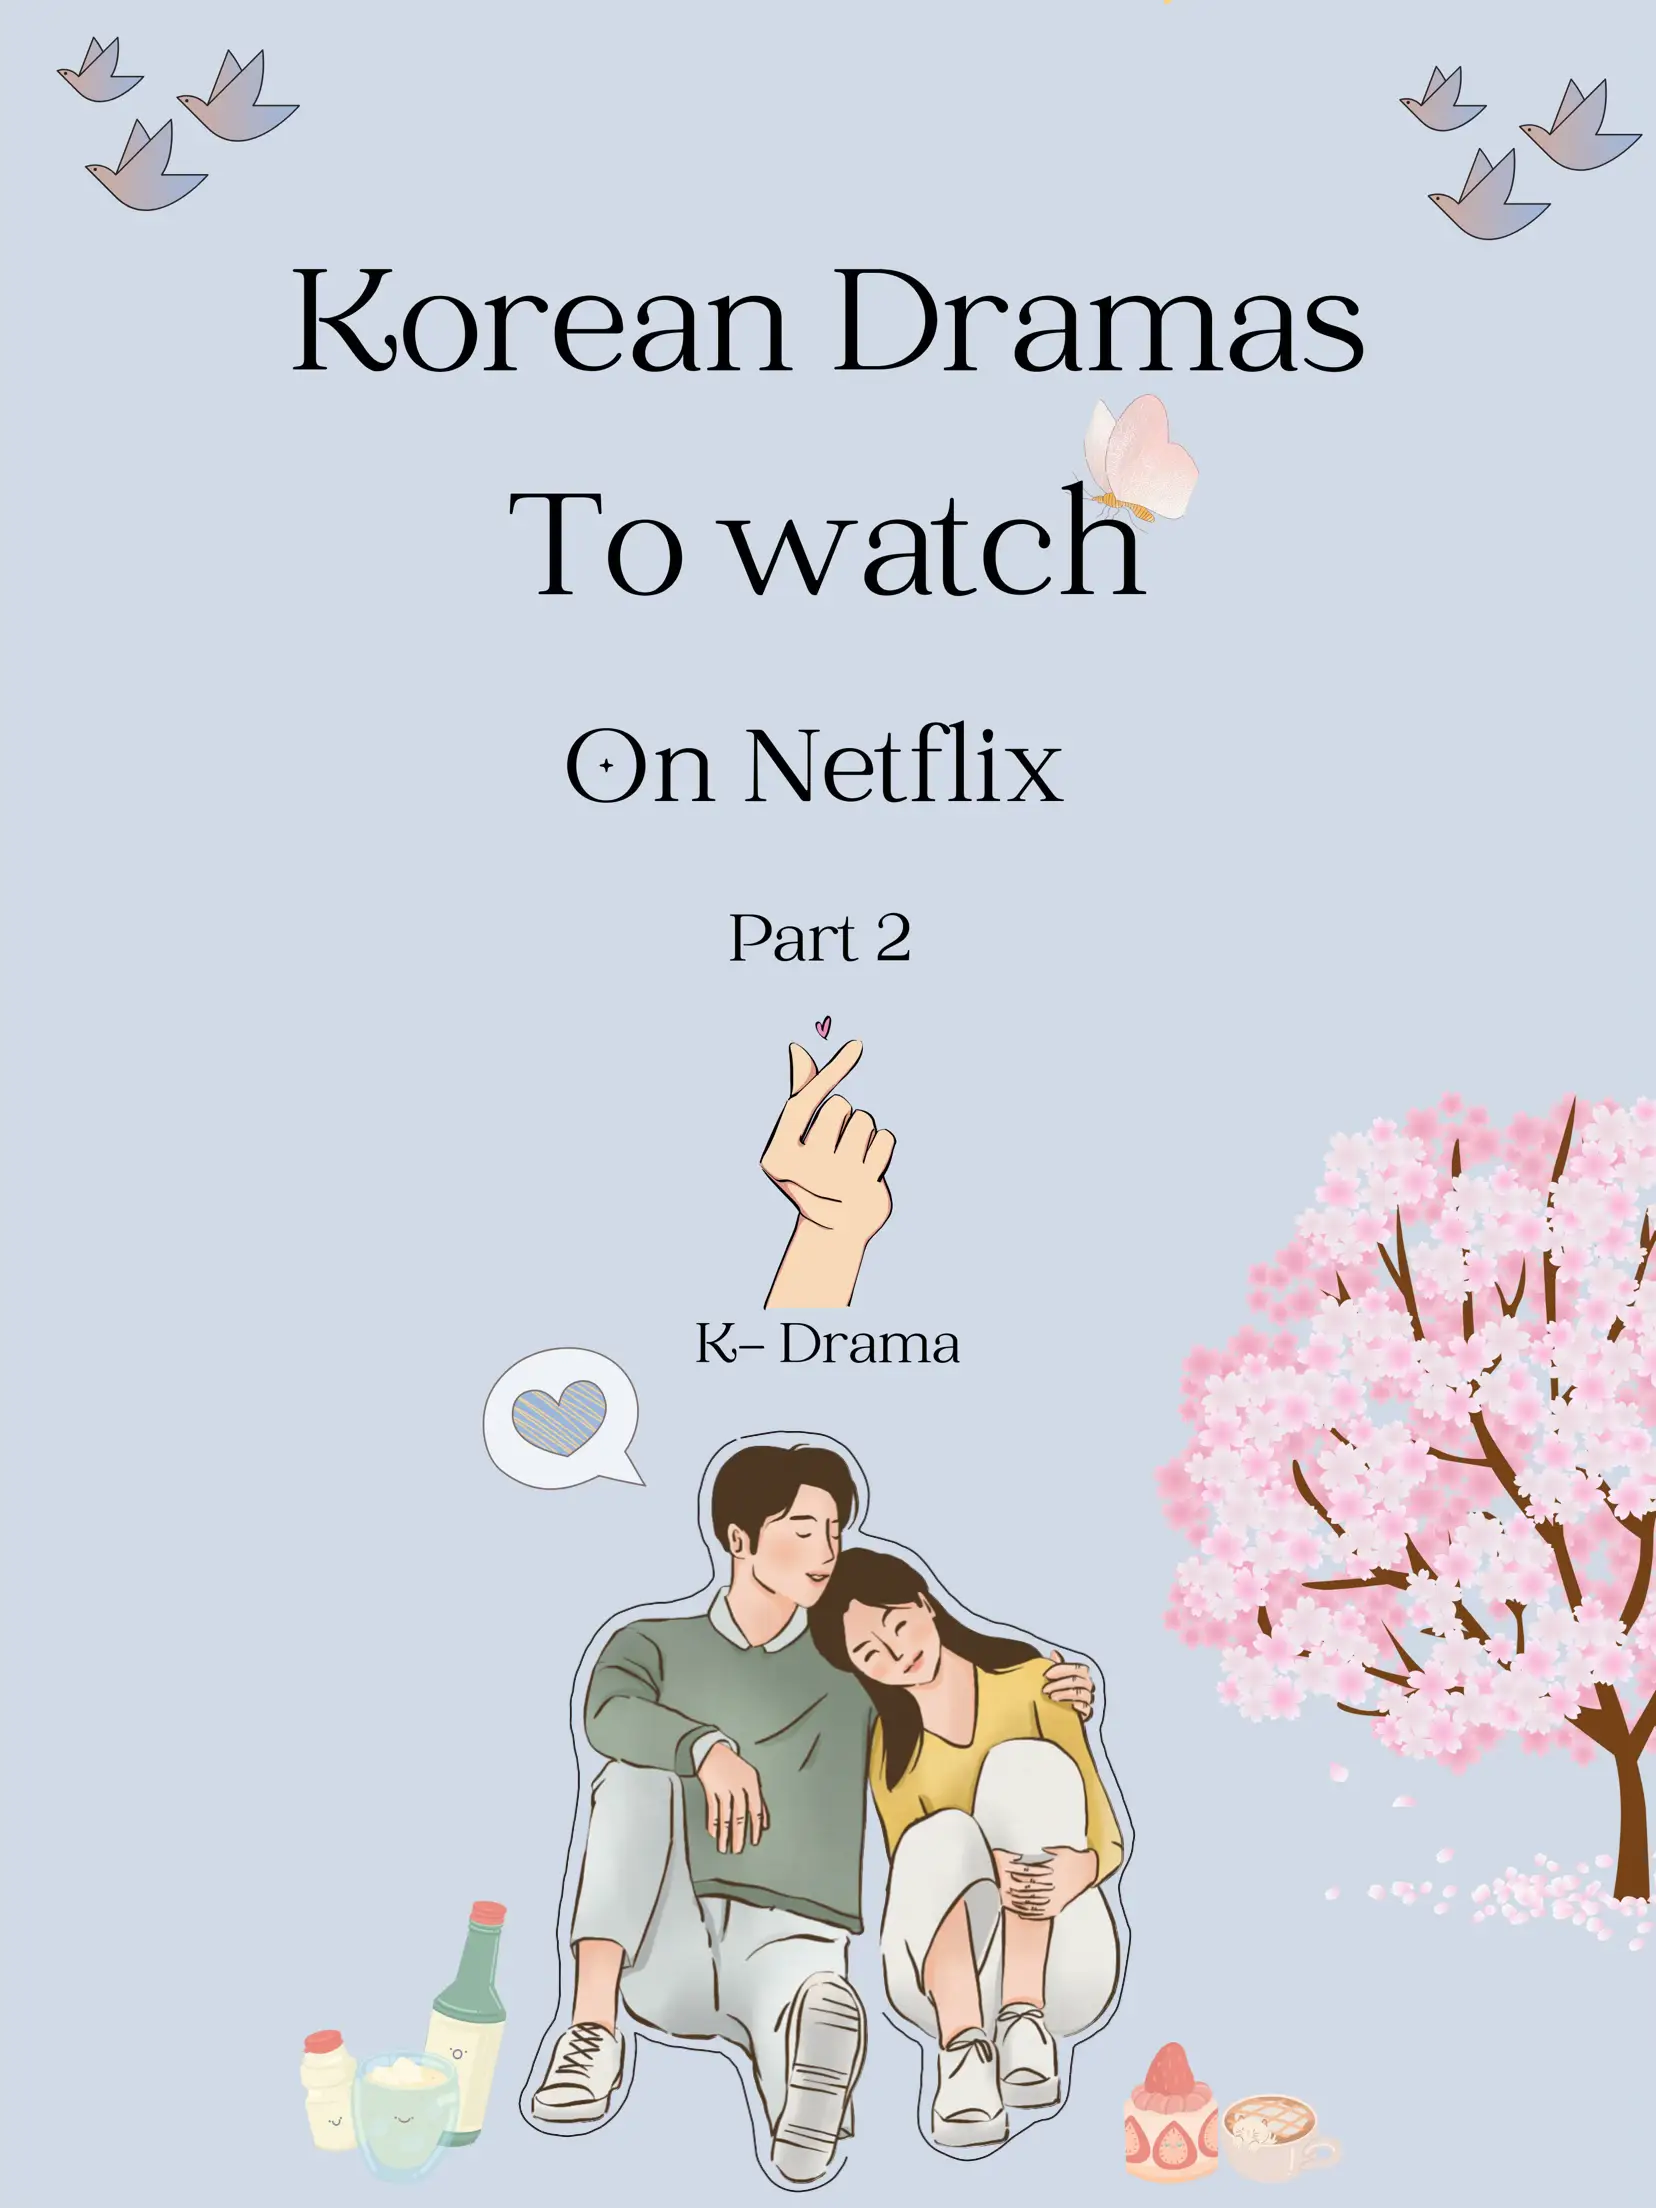 K-Dramas to watch on Netflix pt 2🫶🏼🌸's images